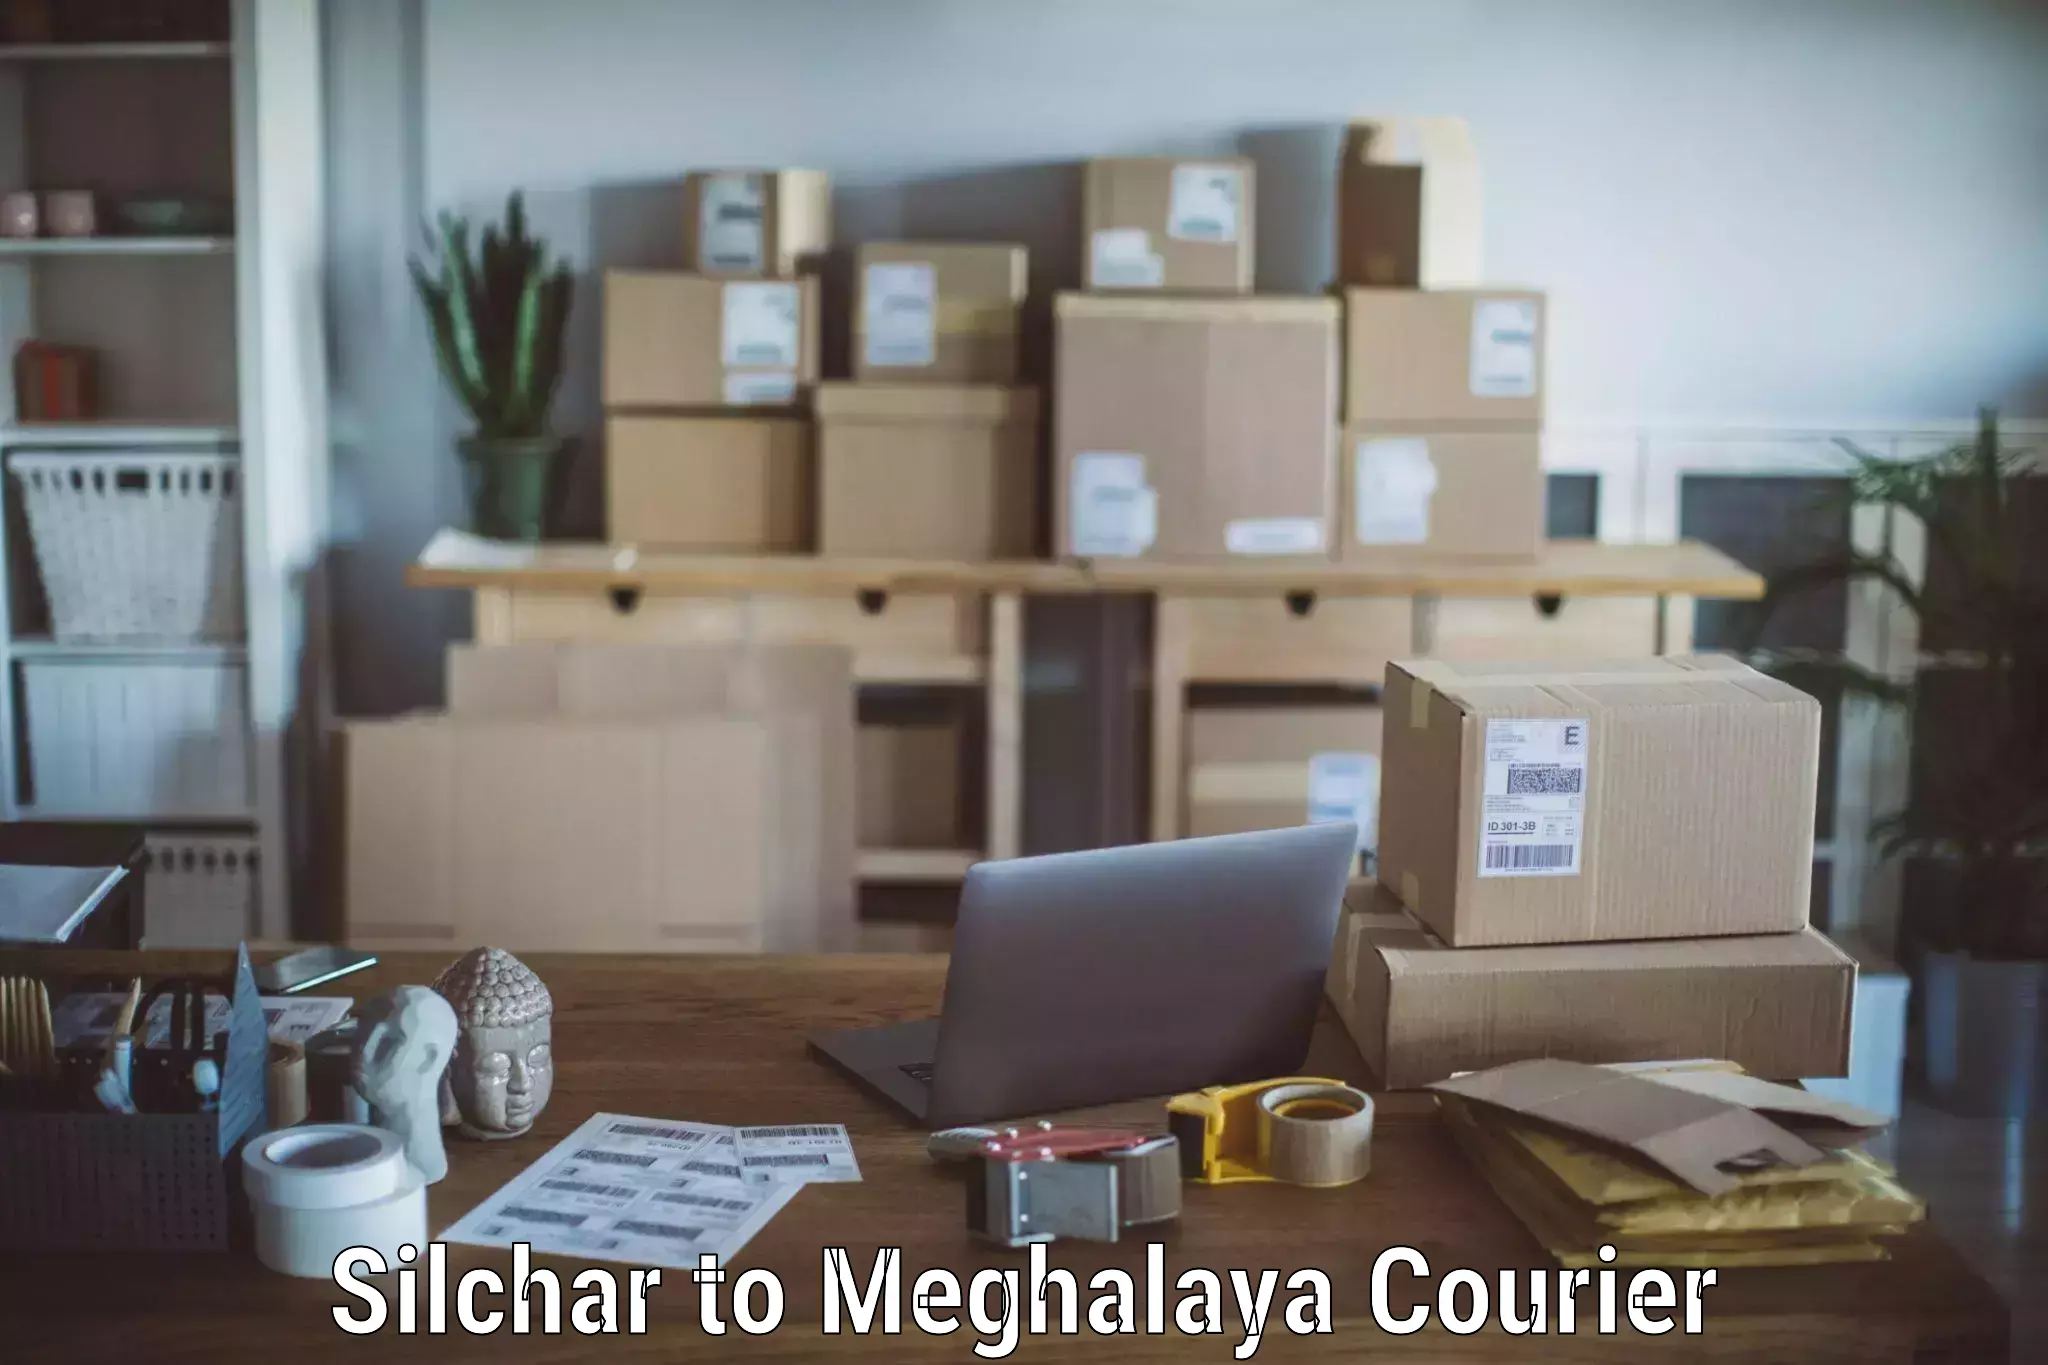 Quality relocation assistance Silchar to Shillong